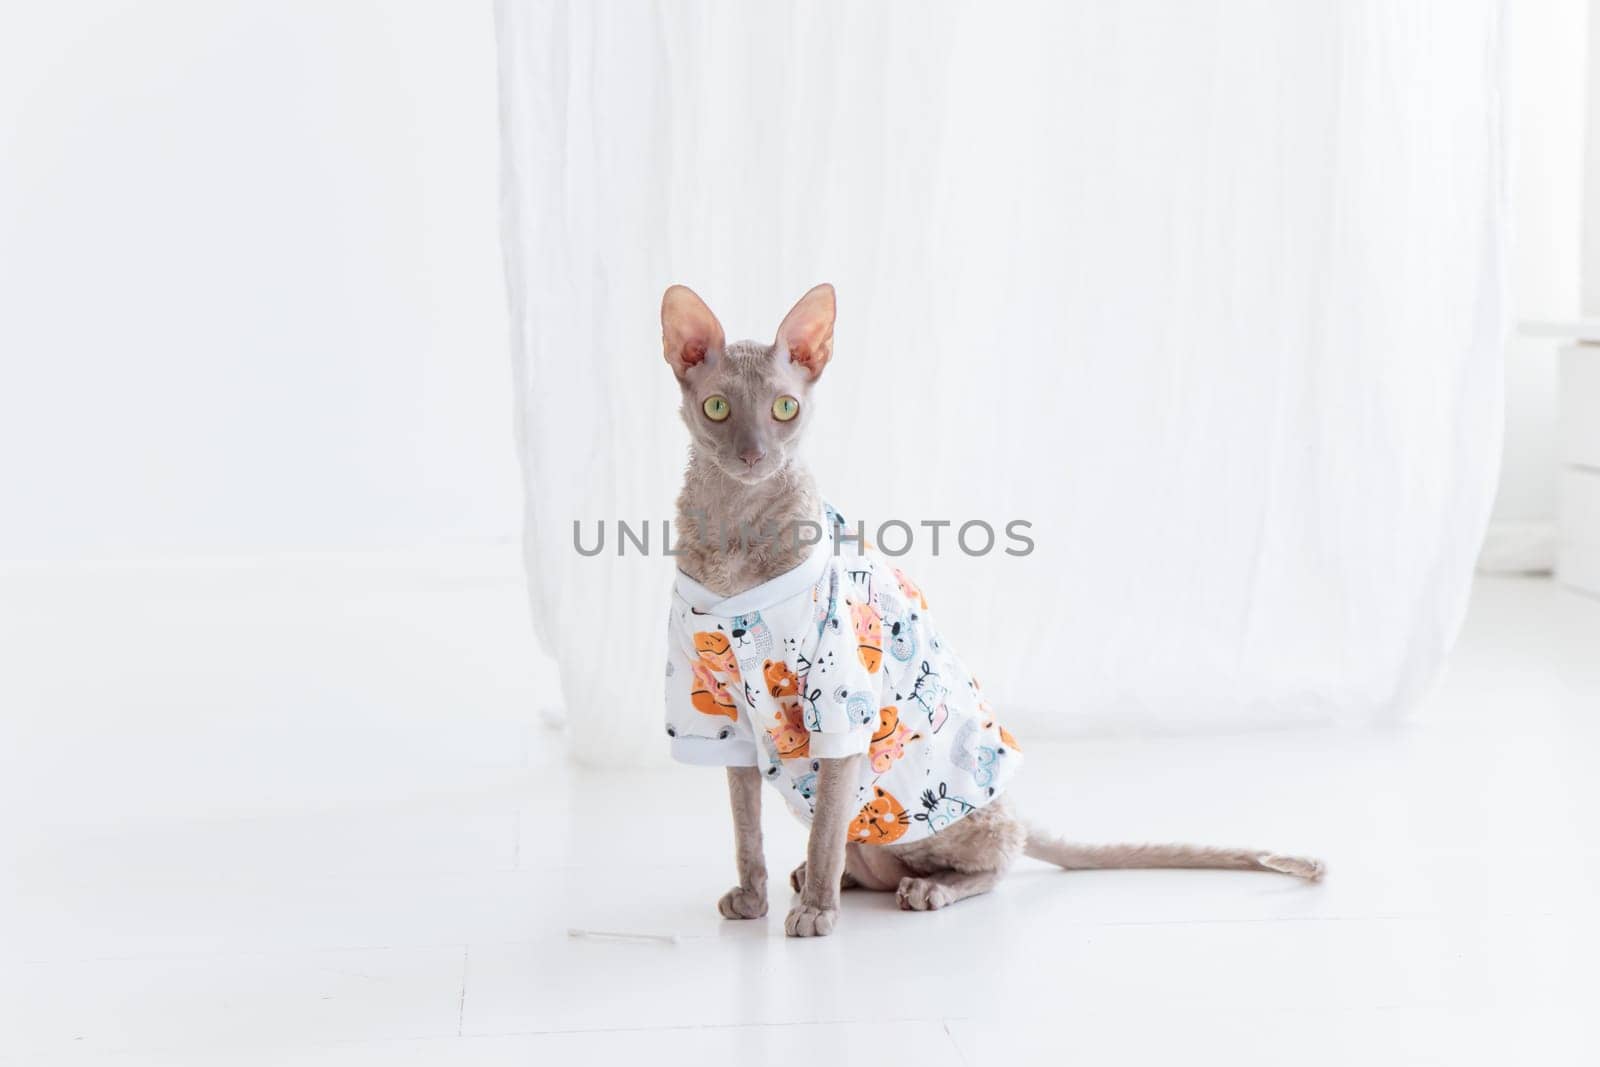 Cute cornish rex cat dressed in funny clothes on the white floor